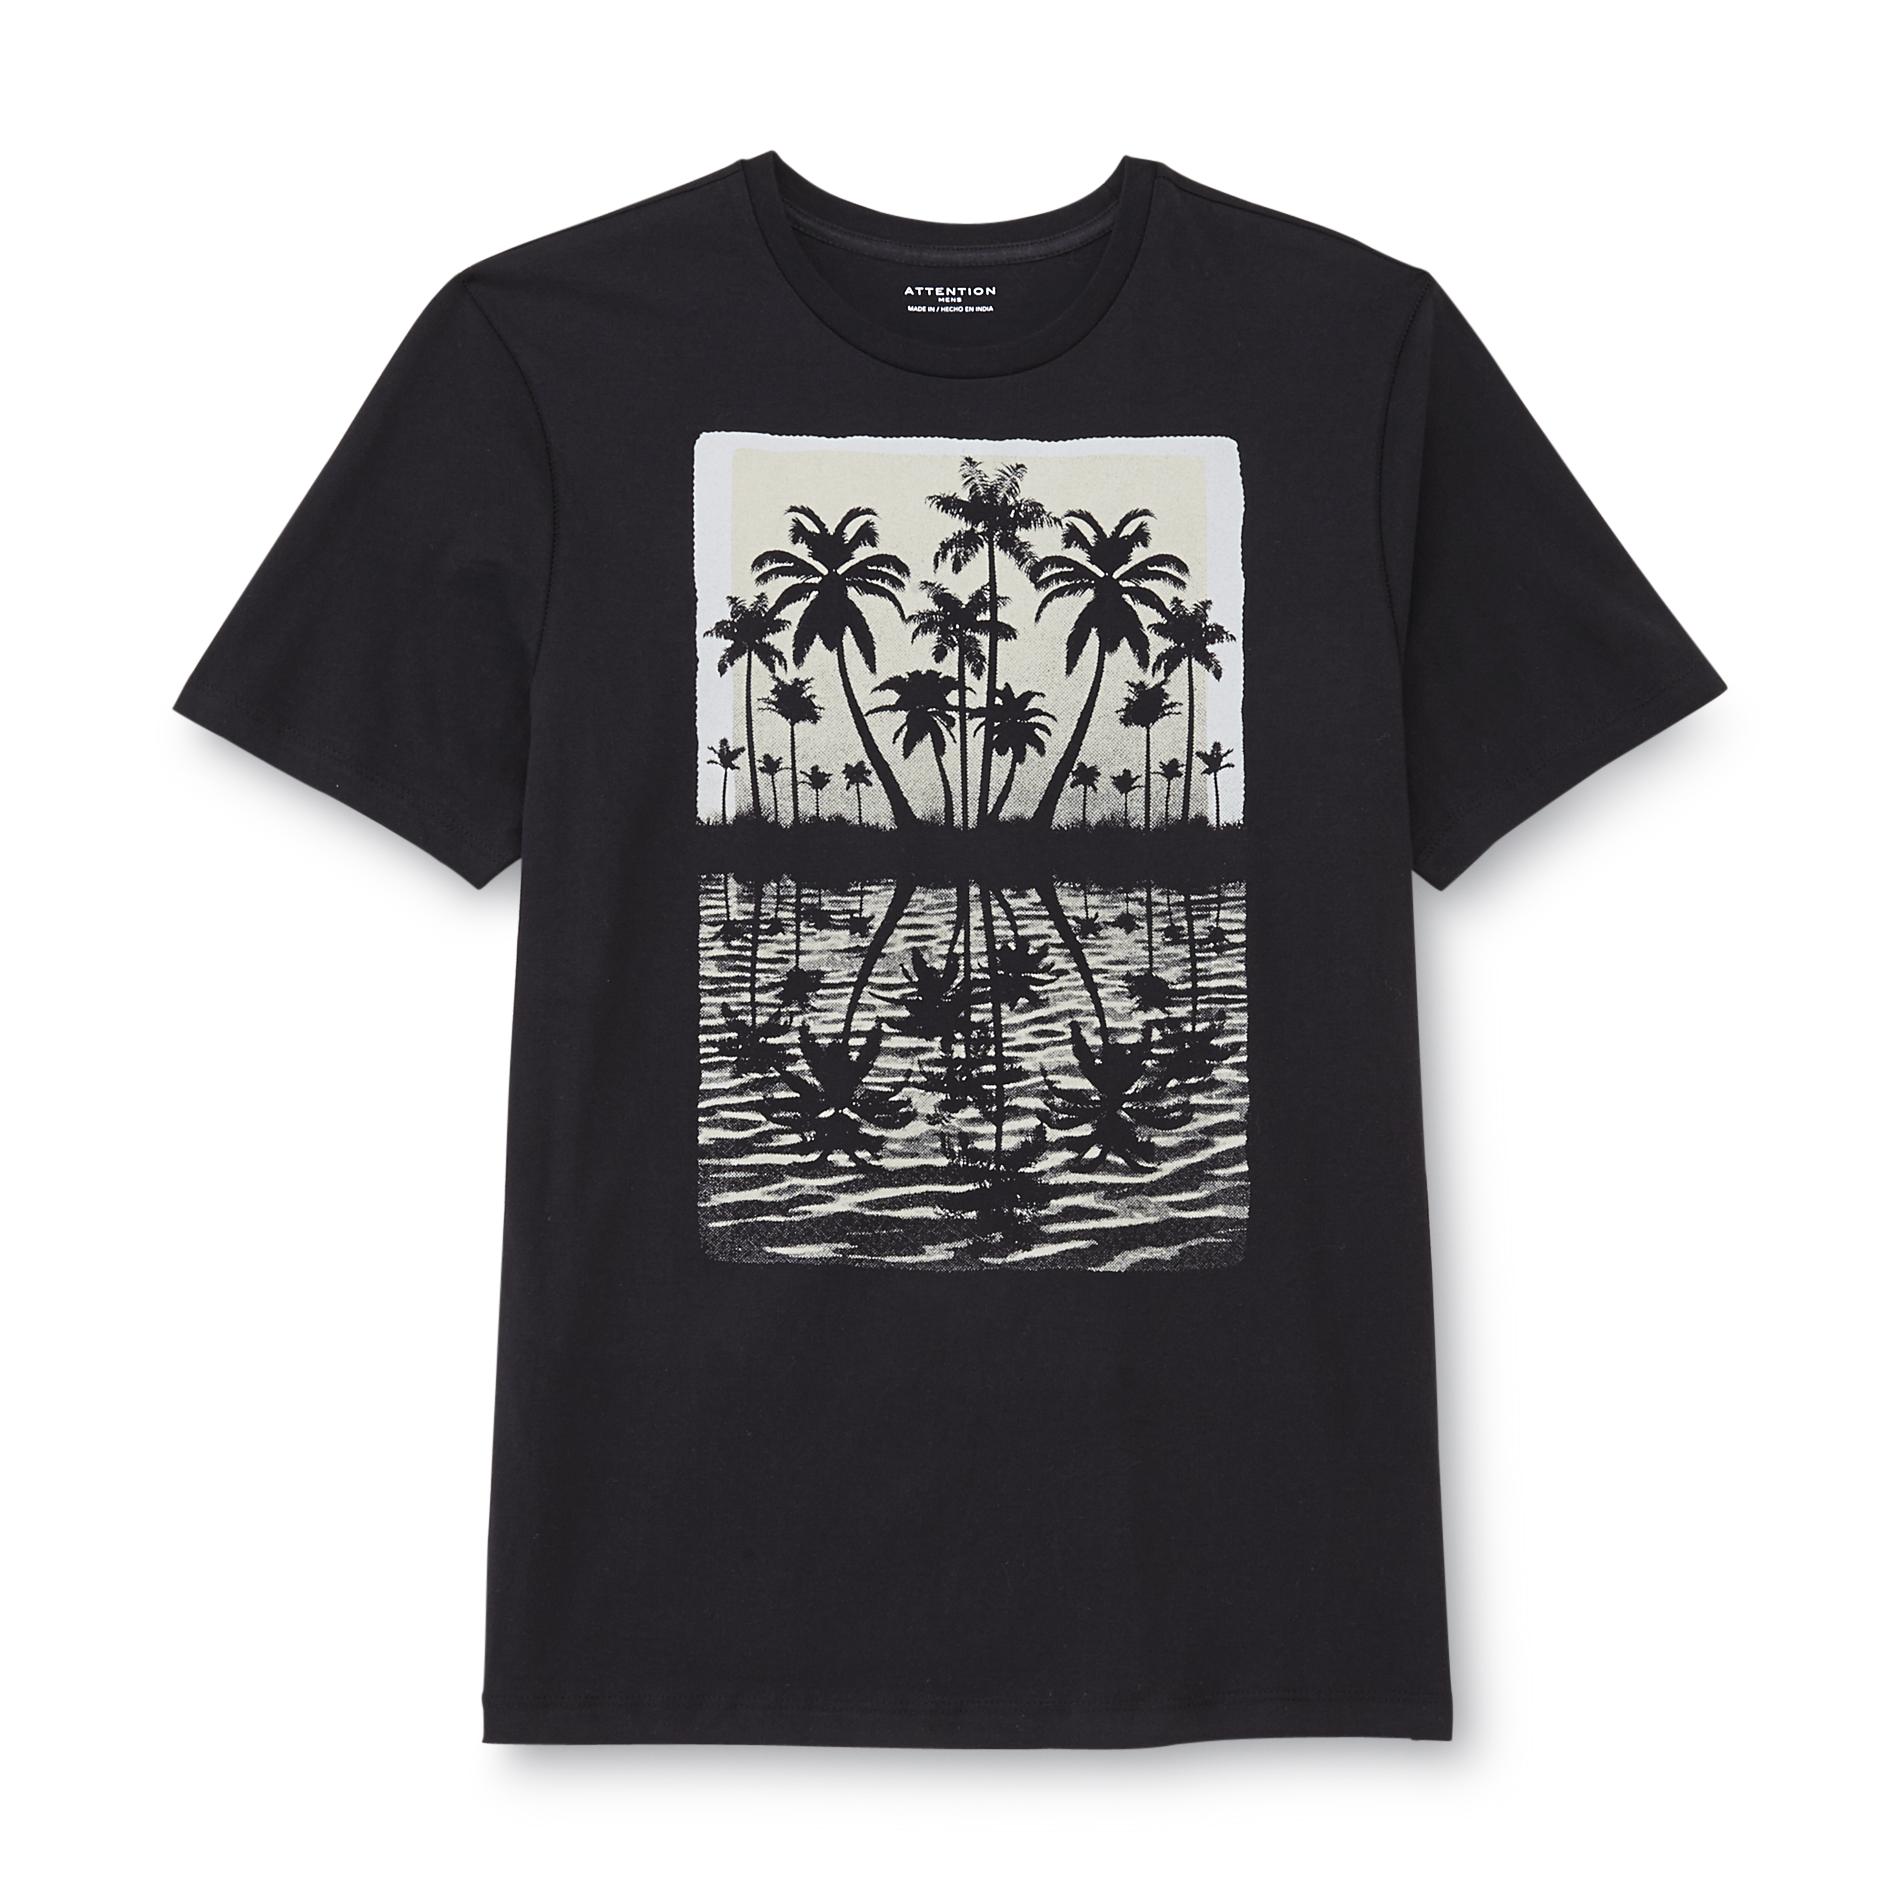 Attention Men's Short-Sleeve Graphic T-Shirt - Palm Trees